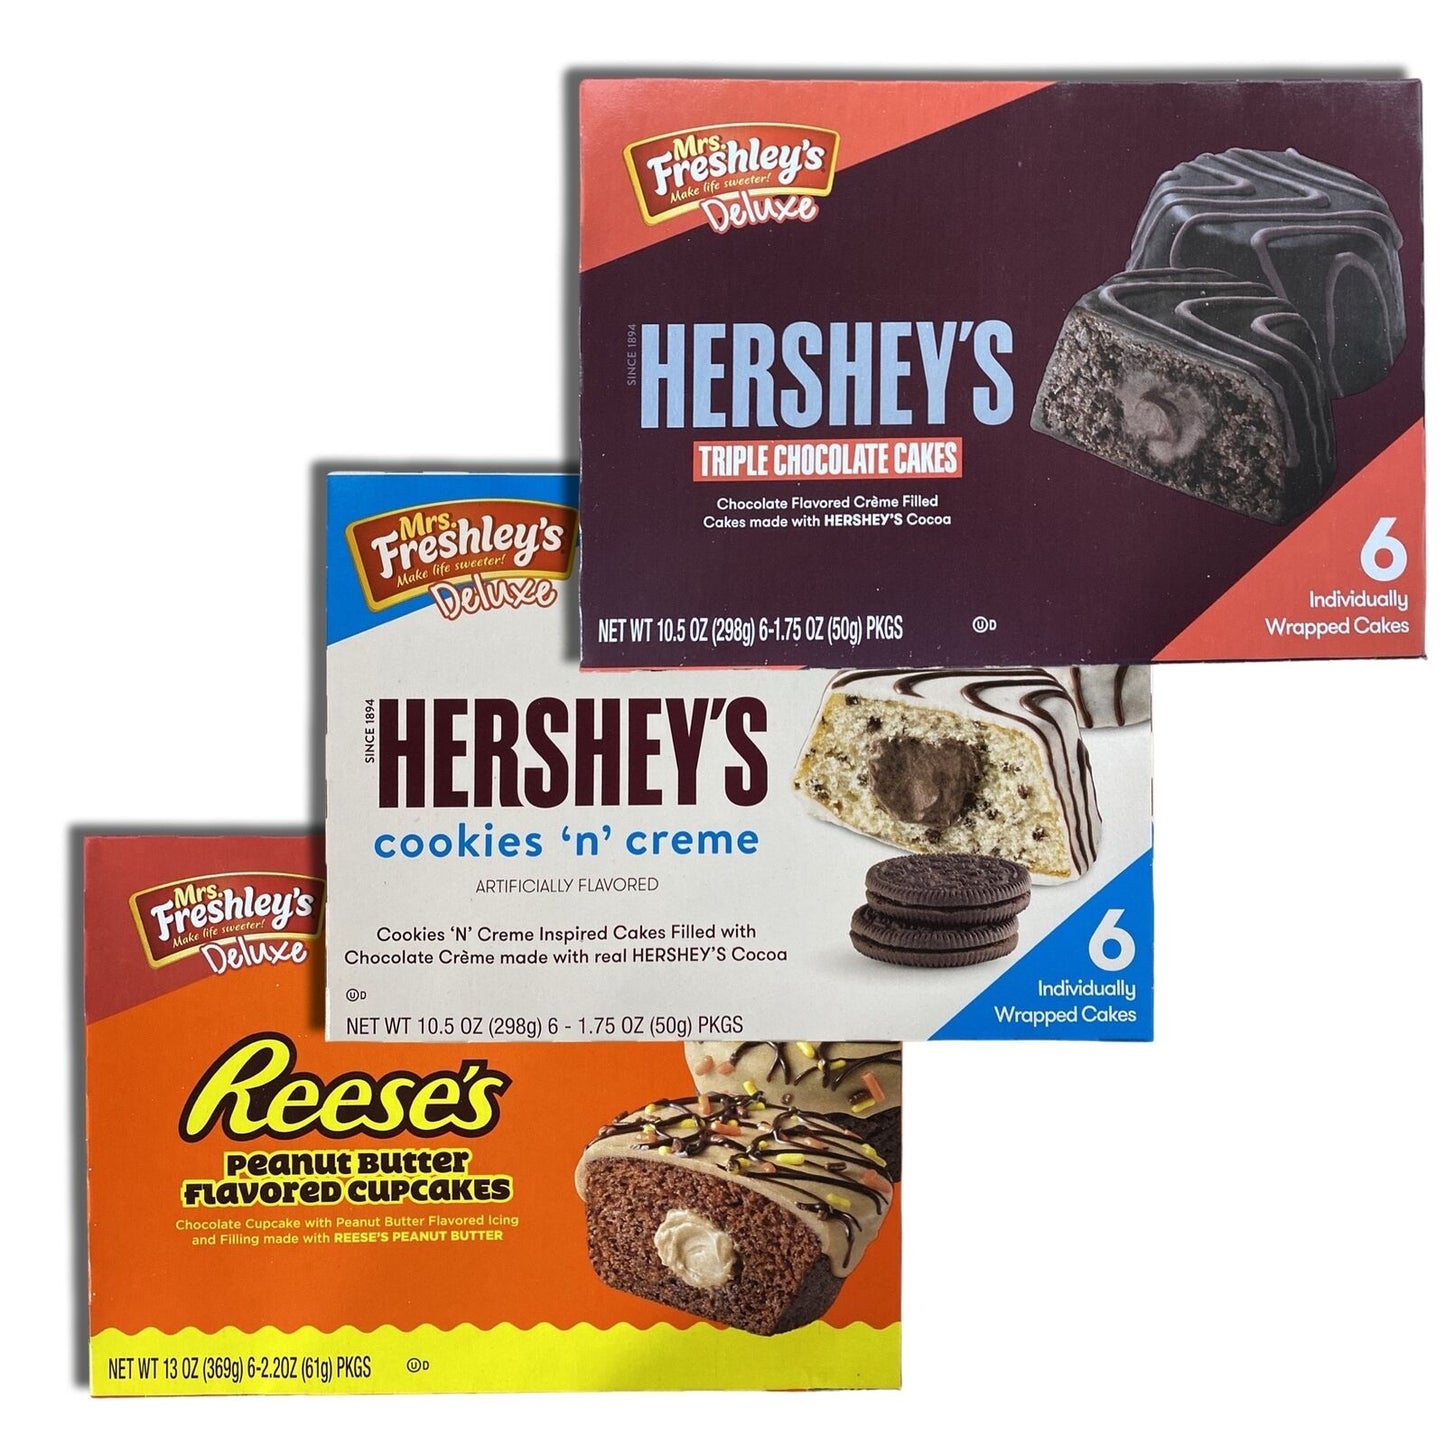 Tribeca Curations | Mrs. Freshley'S Snack Cakes Combo Packs Bundled by Tribeca